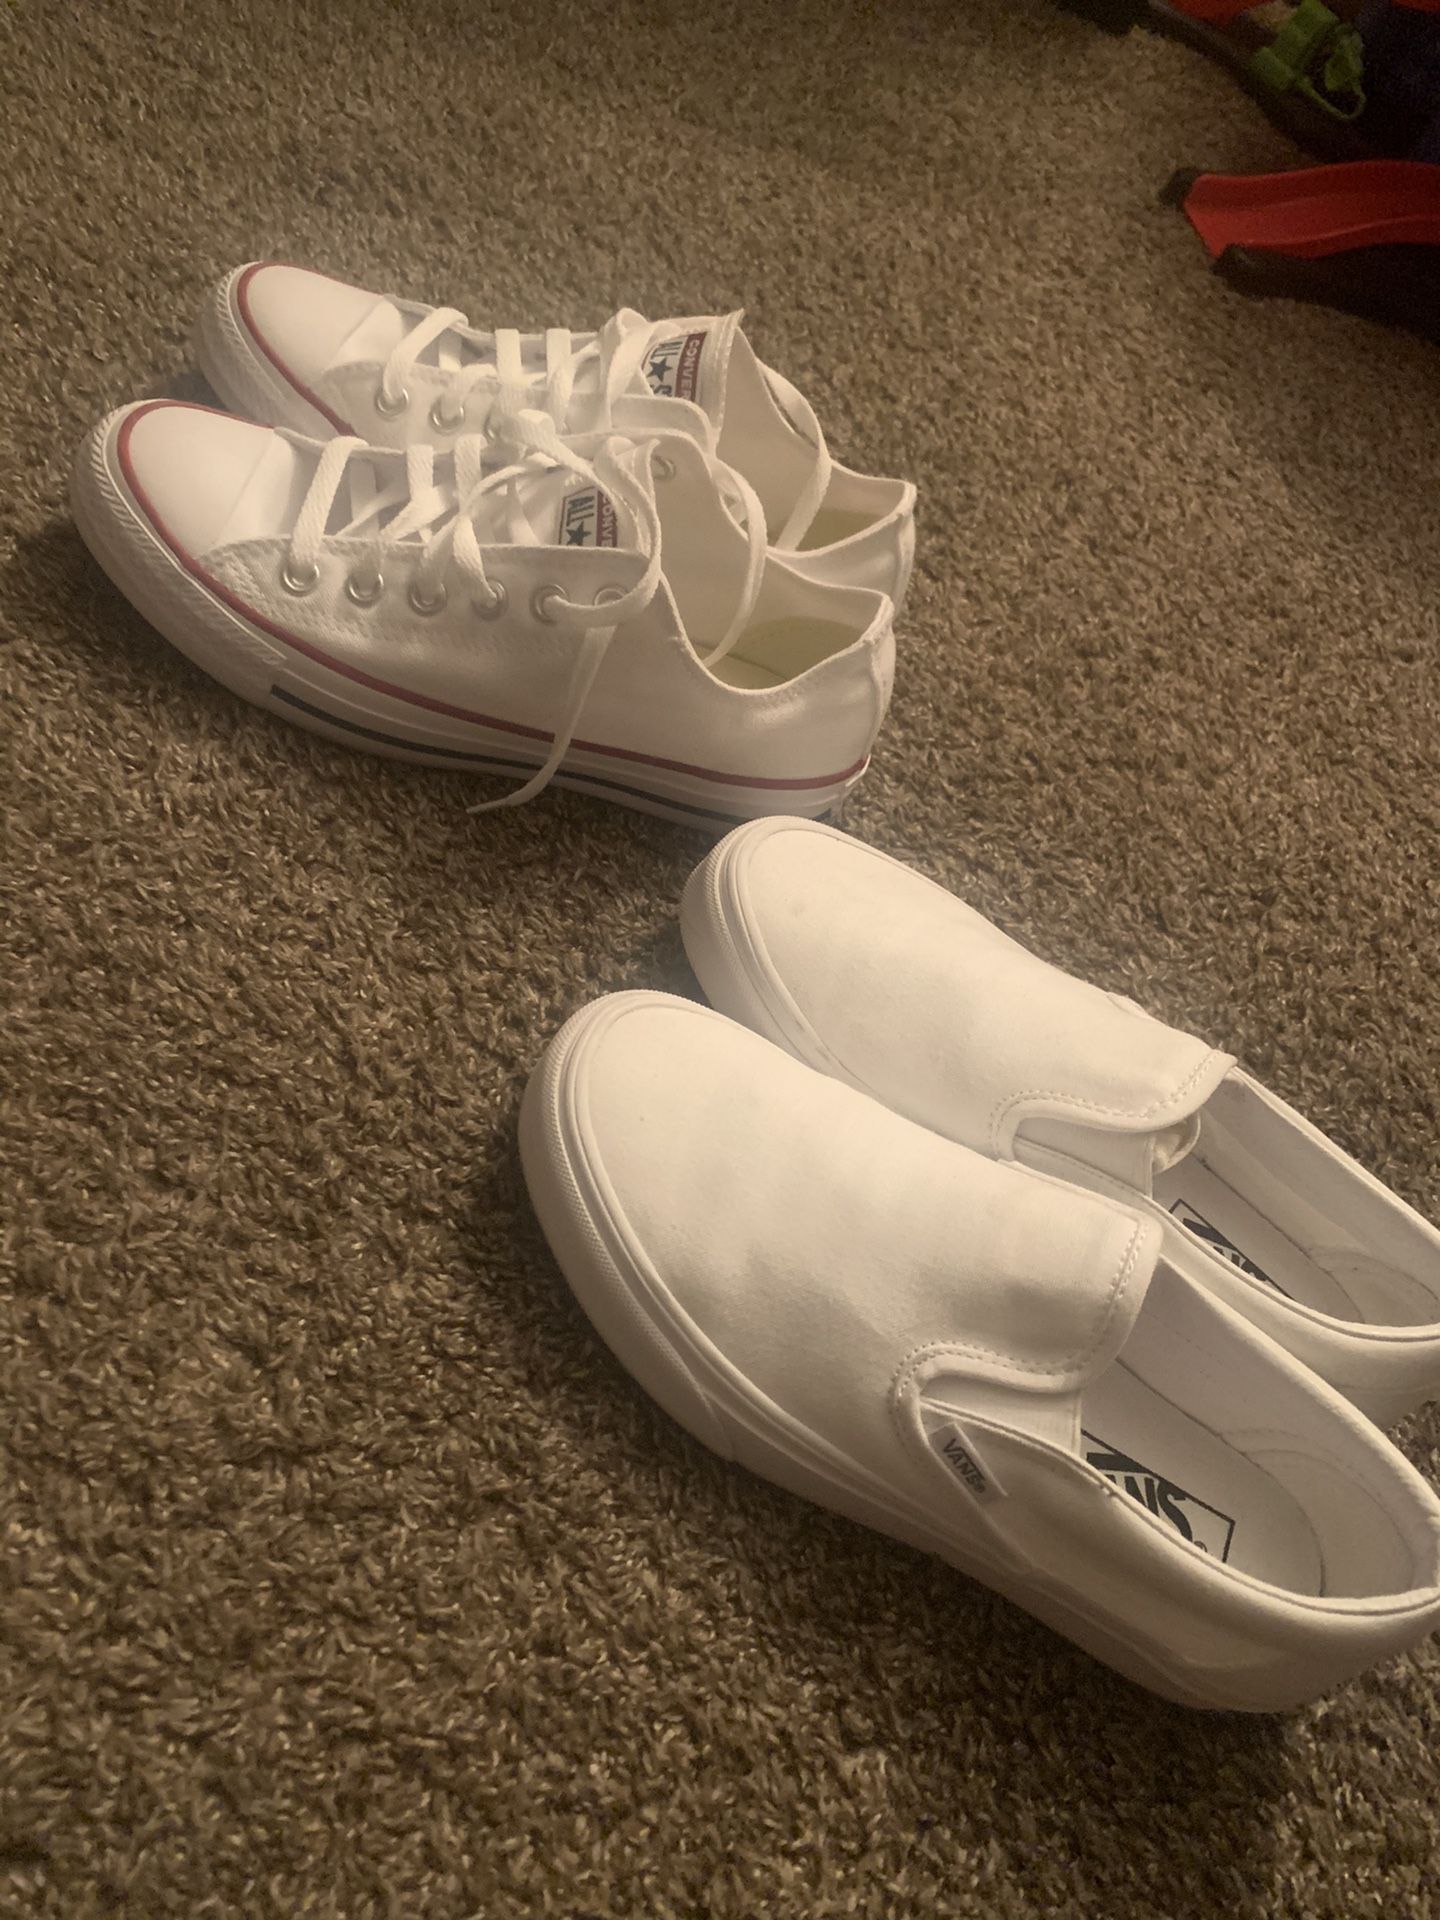 Women’s White VANS size 7 and Converse size 7